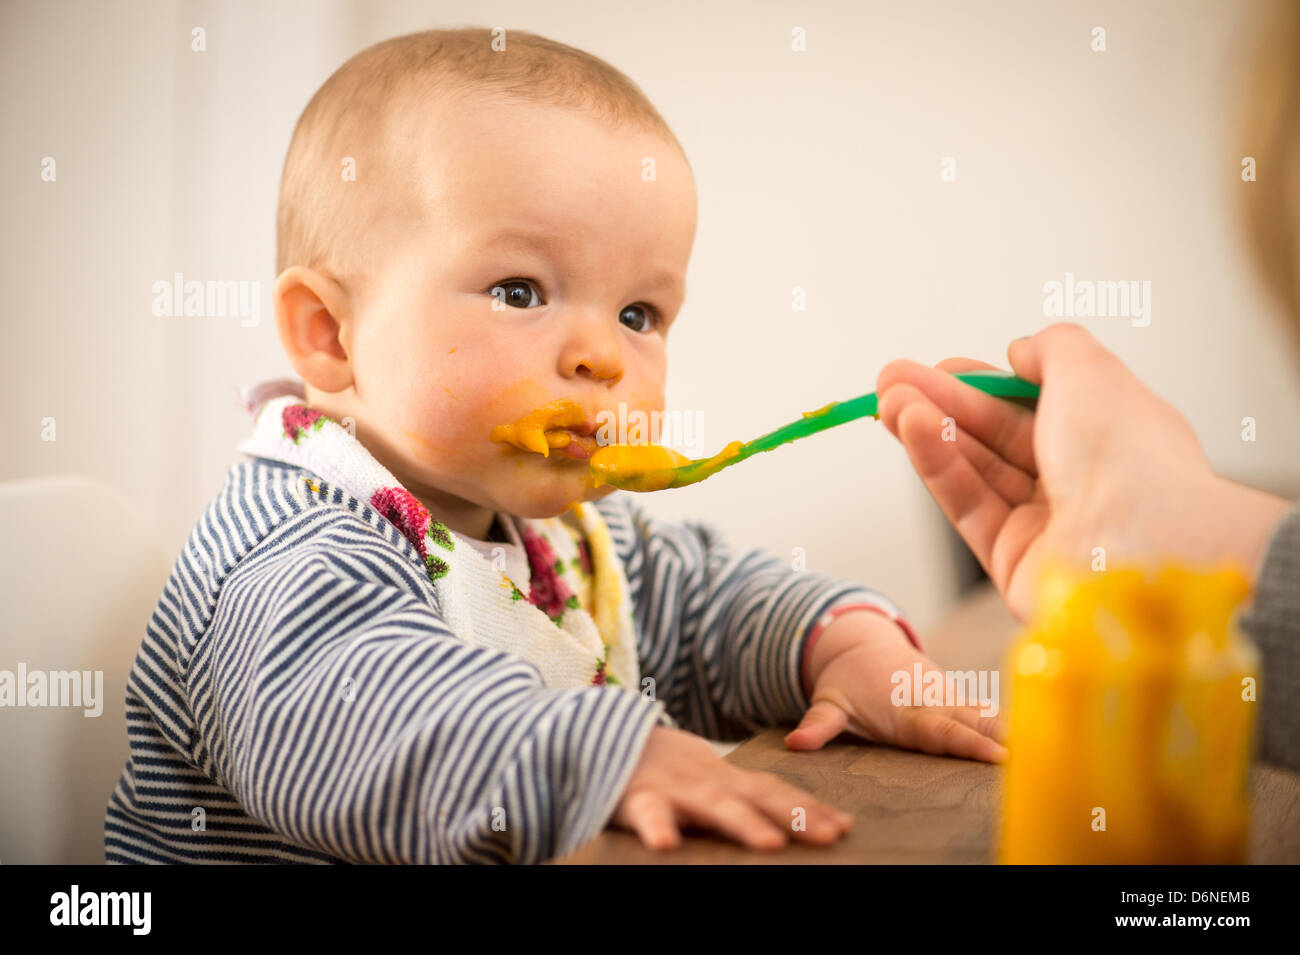 Berlin, Germany, 8-month-old baby while Fuettern Stock Photo